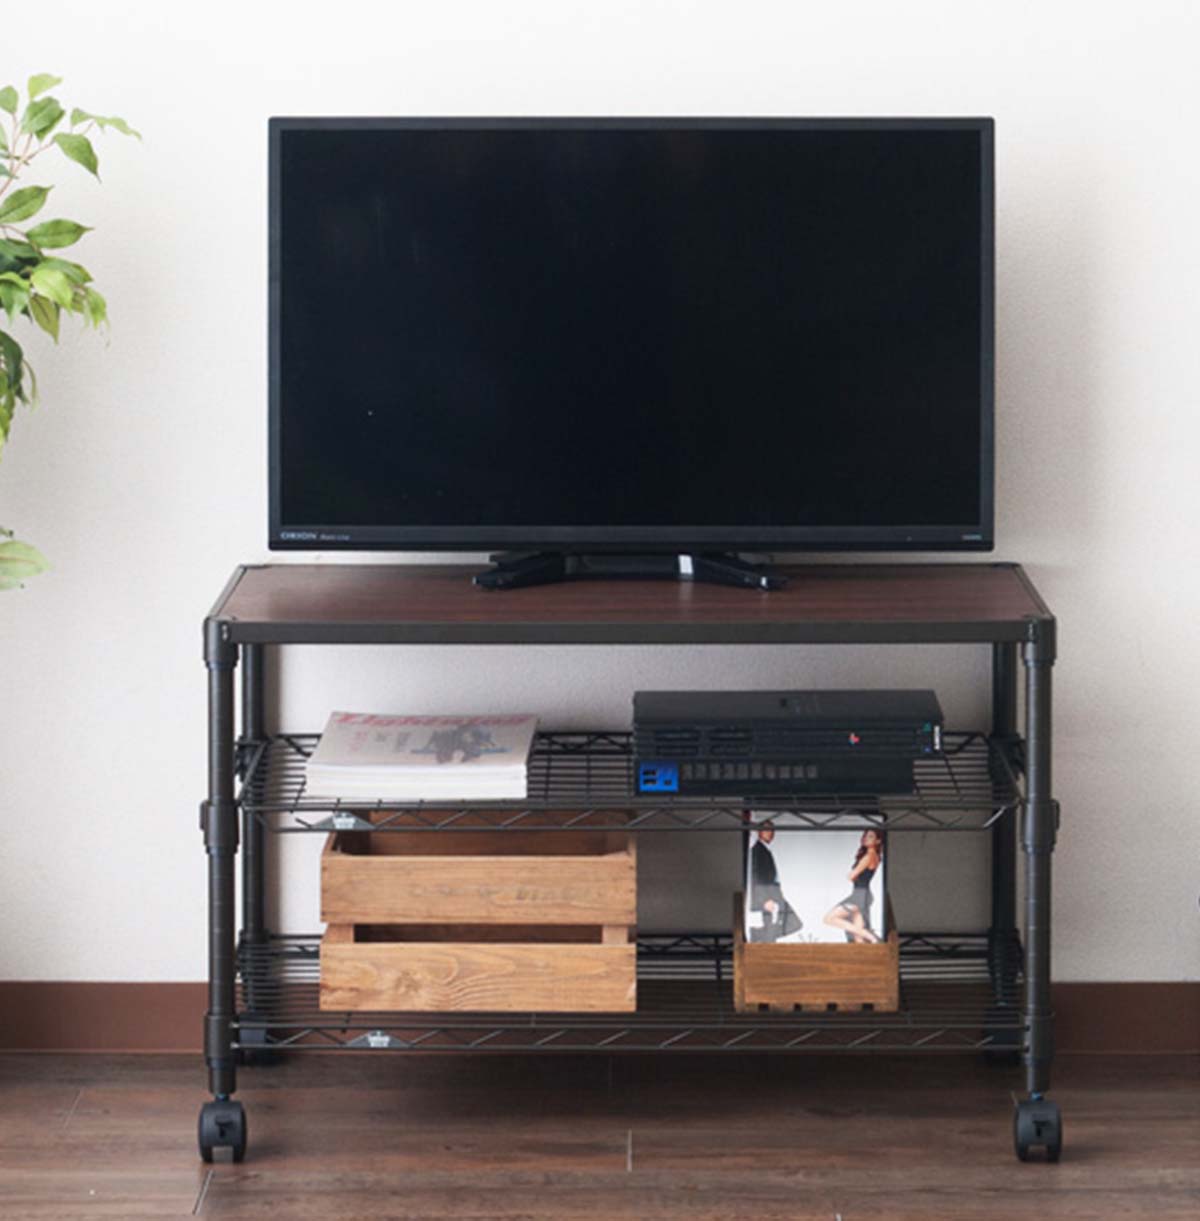 3-Tier TV Stand with Wood Top / TV Console Table With Open Storage Shelves on Wheels For Living Room  Bedroom 40-80